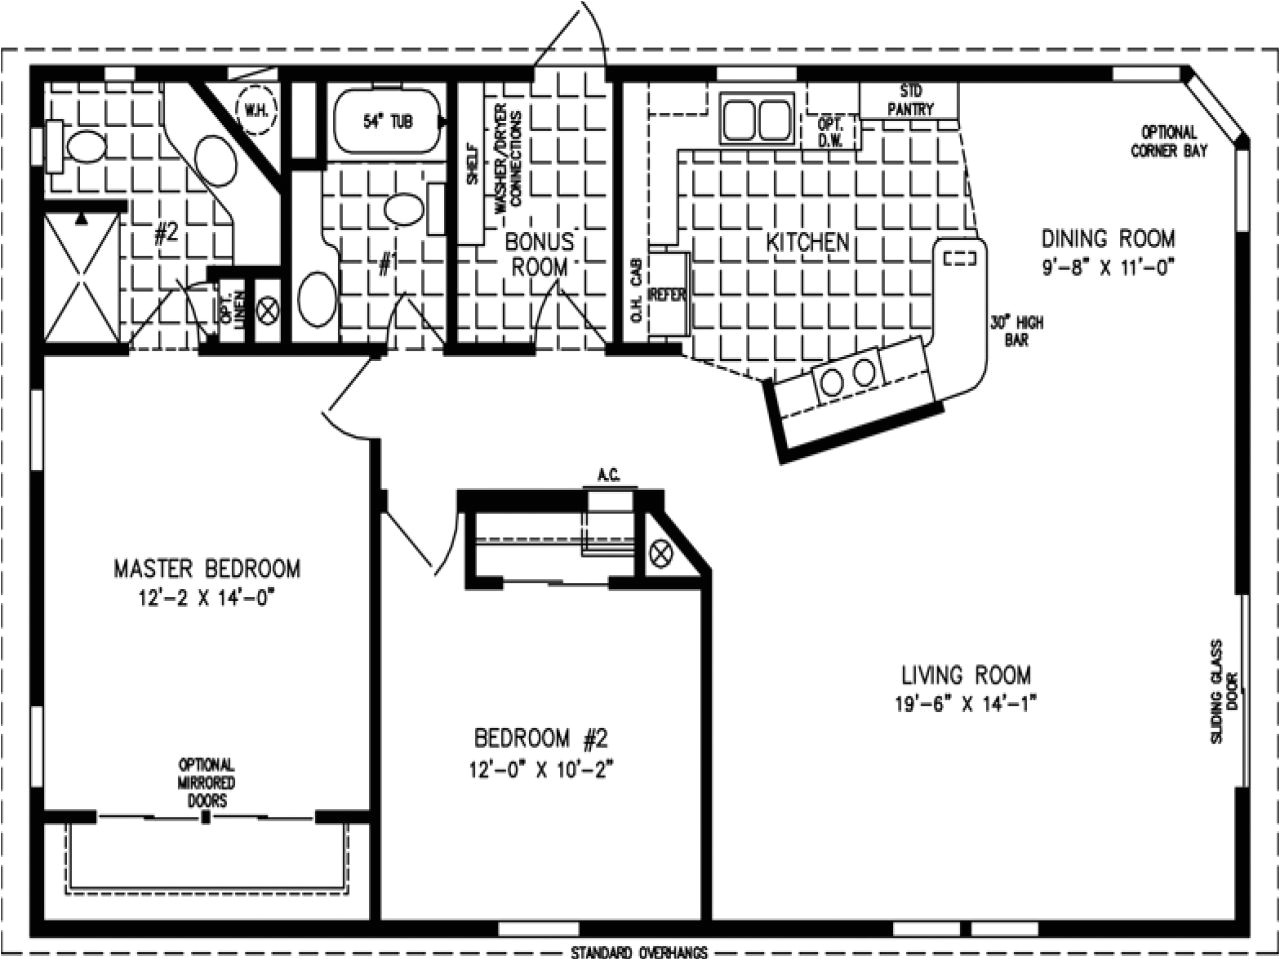 1200 sq ft house plans 2 bedroom